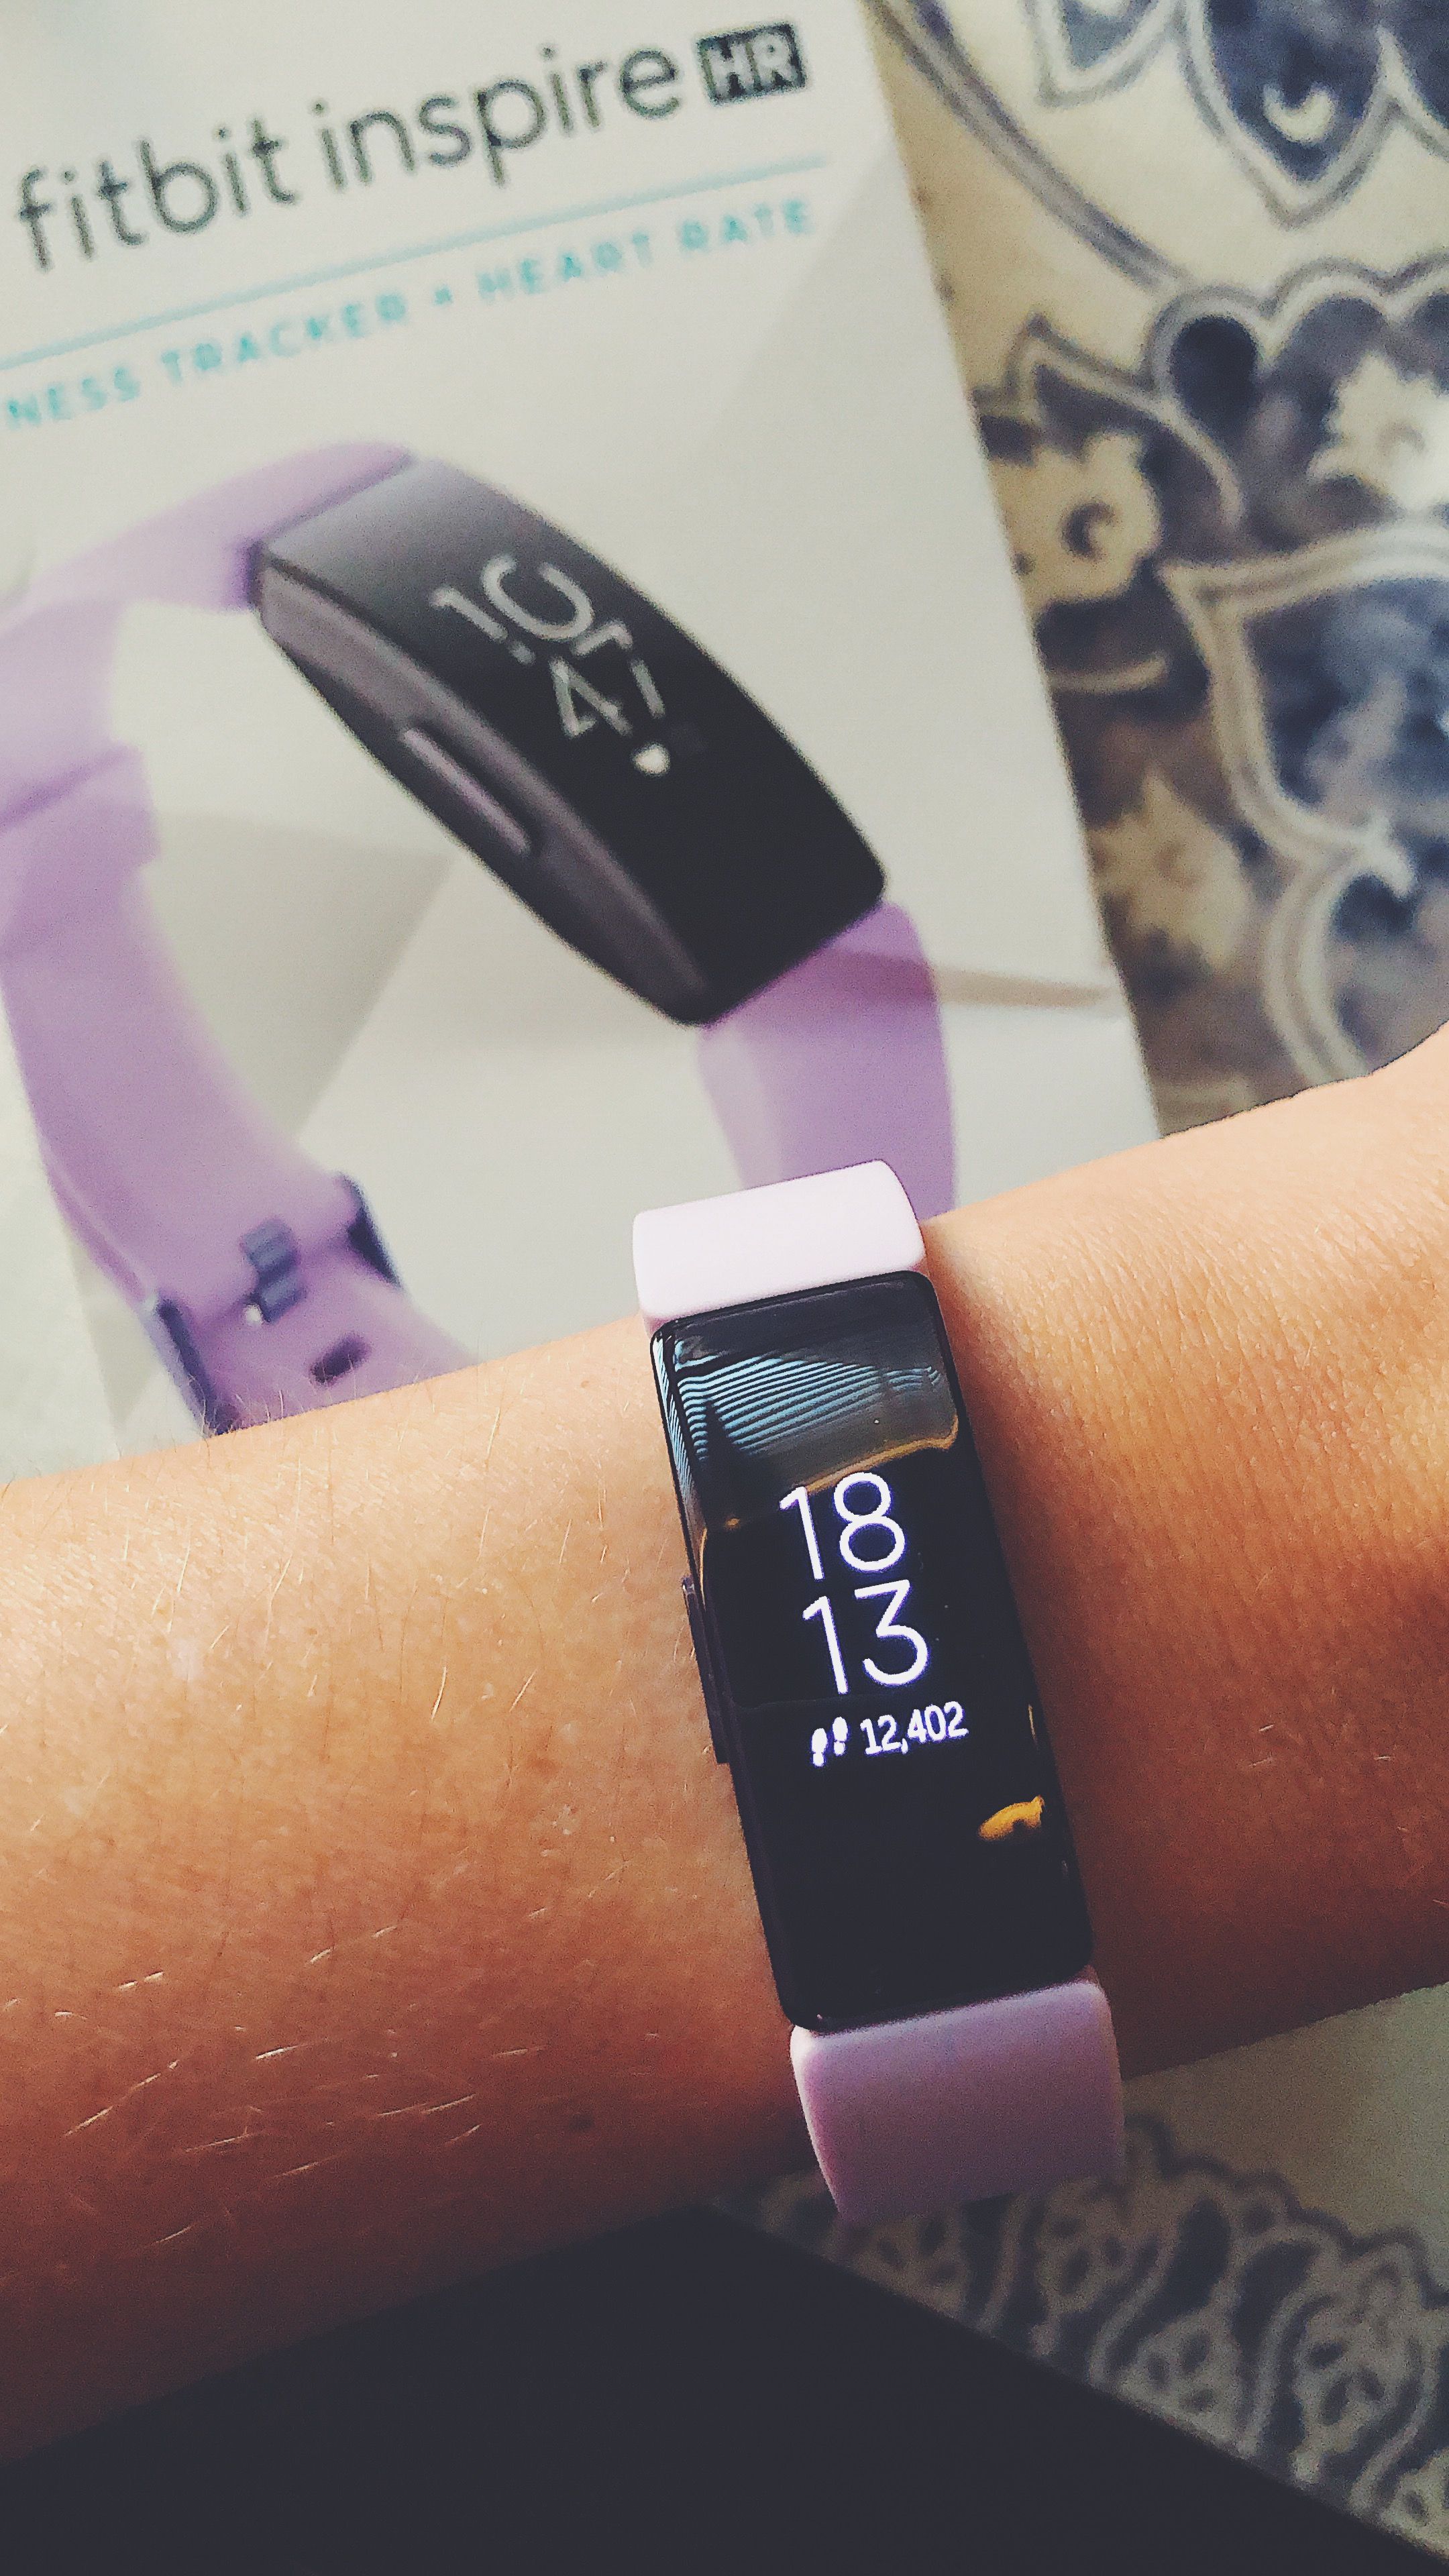 does the fitbit inspire hr have an alarm